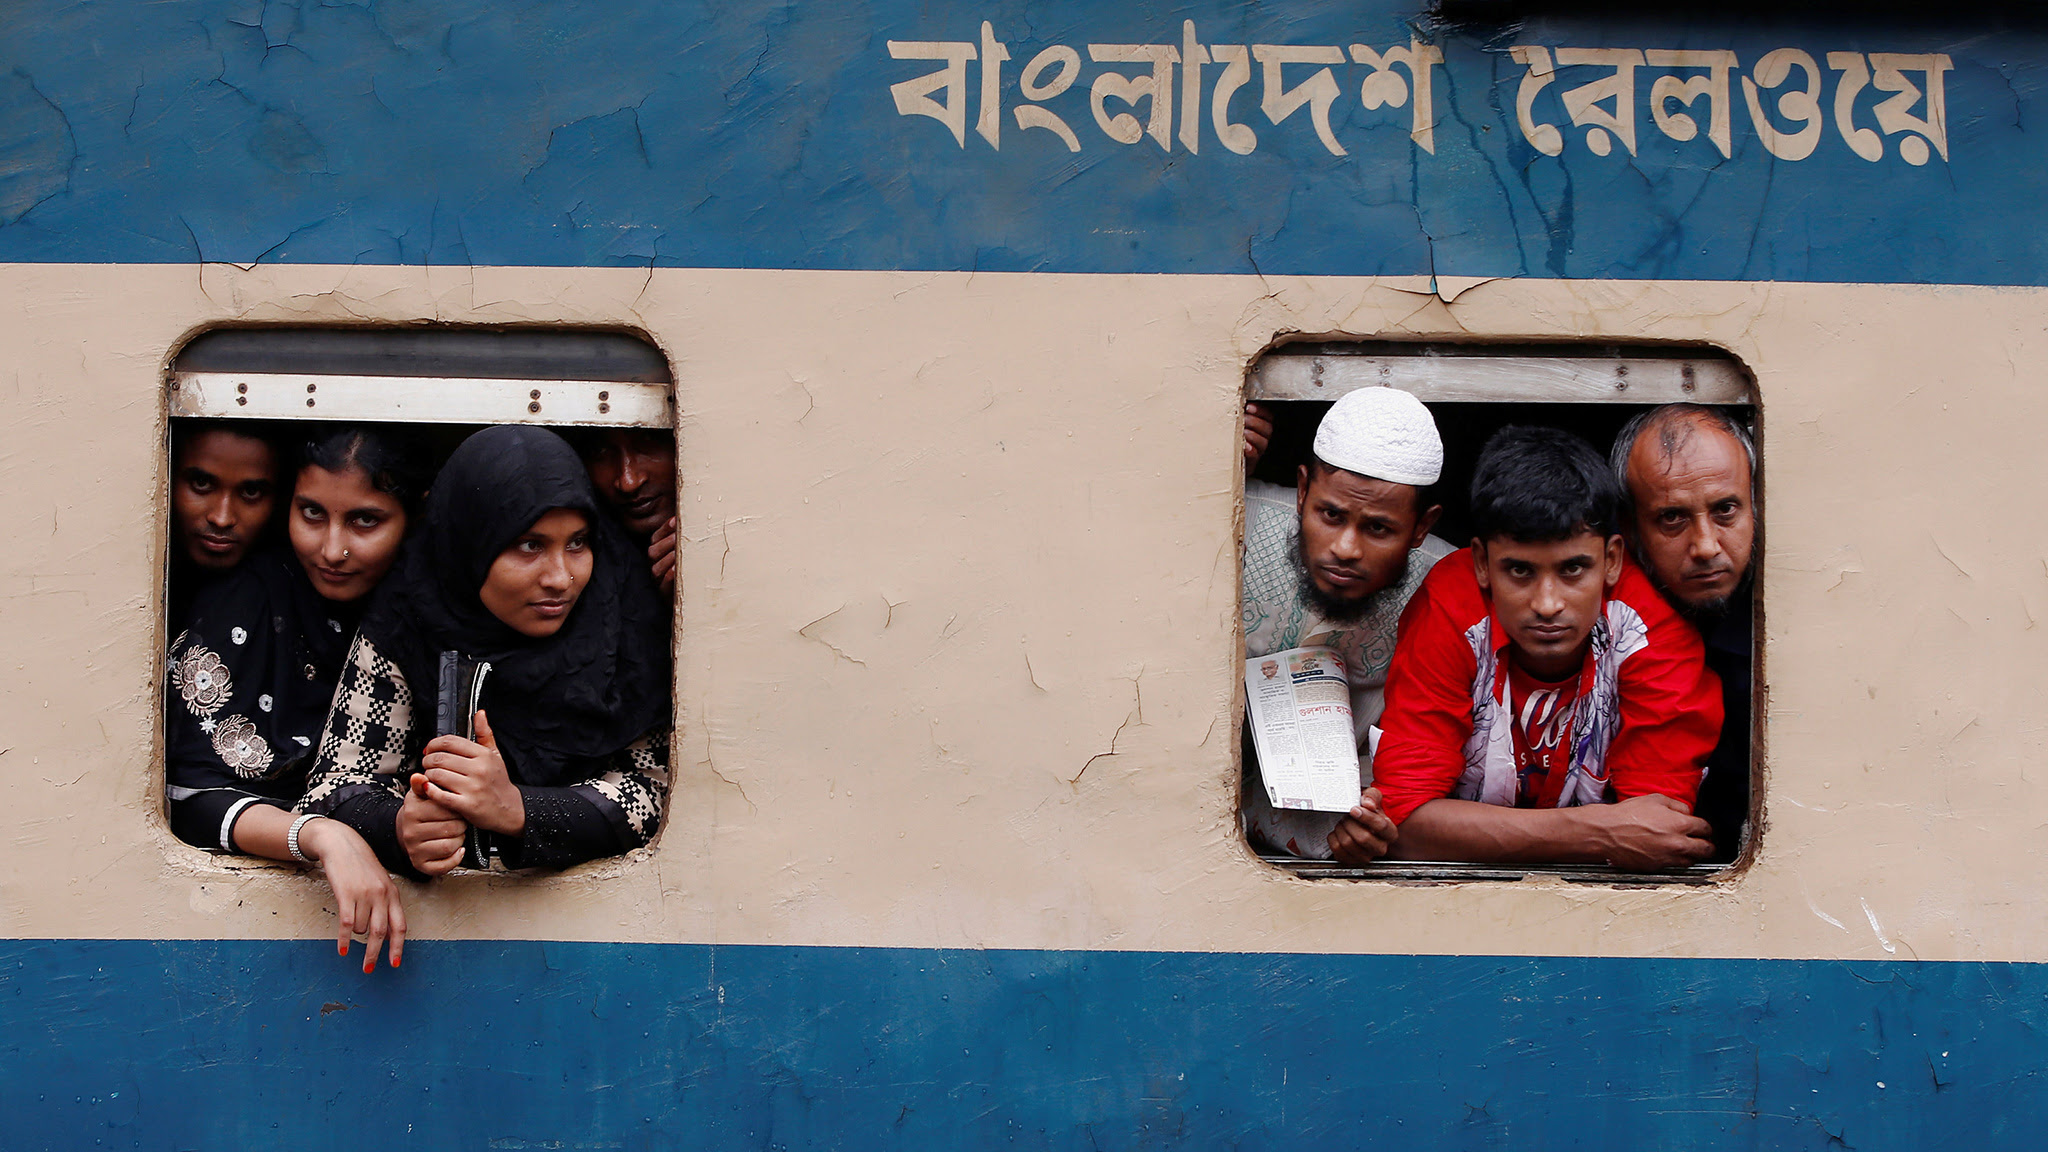 People stand in the windows of an overcrowded passenger train as they travel home to celebrate Eid al-Fitr festival, which marks the end of the Muslim holy fasting month of Ramadan, at a railway station in Dhaka